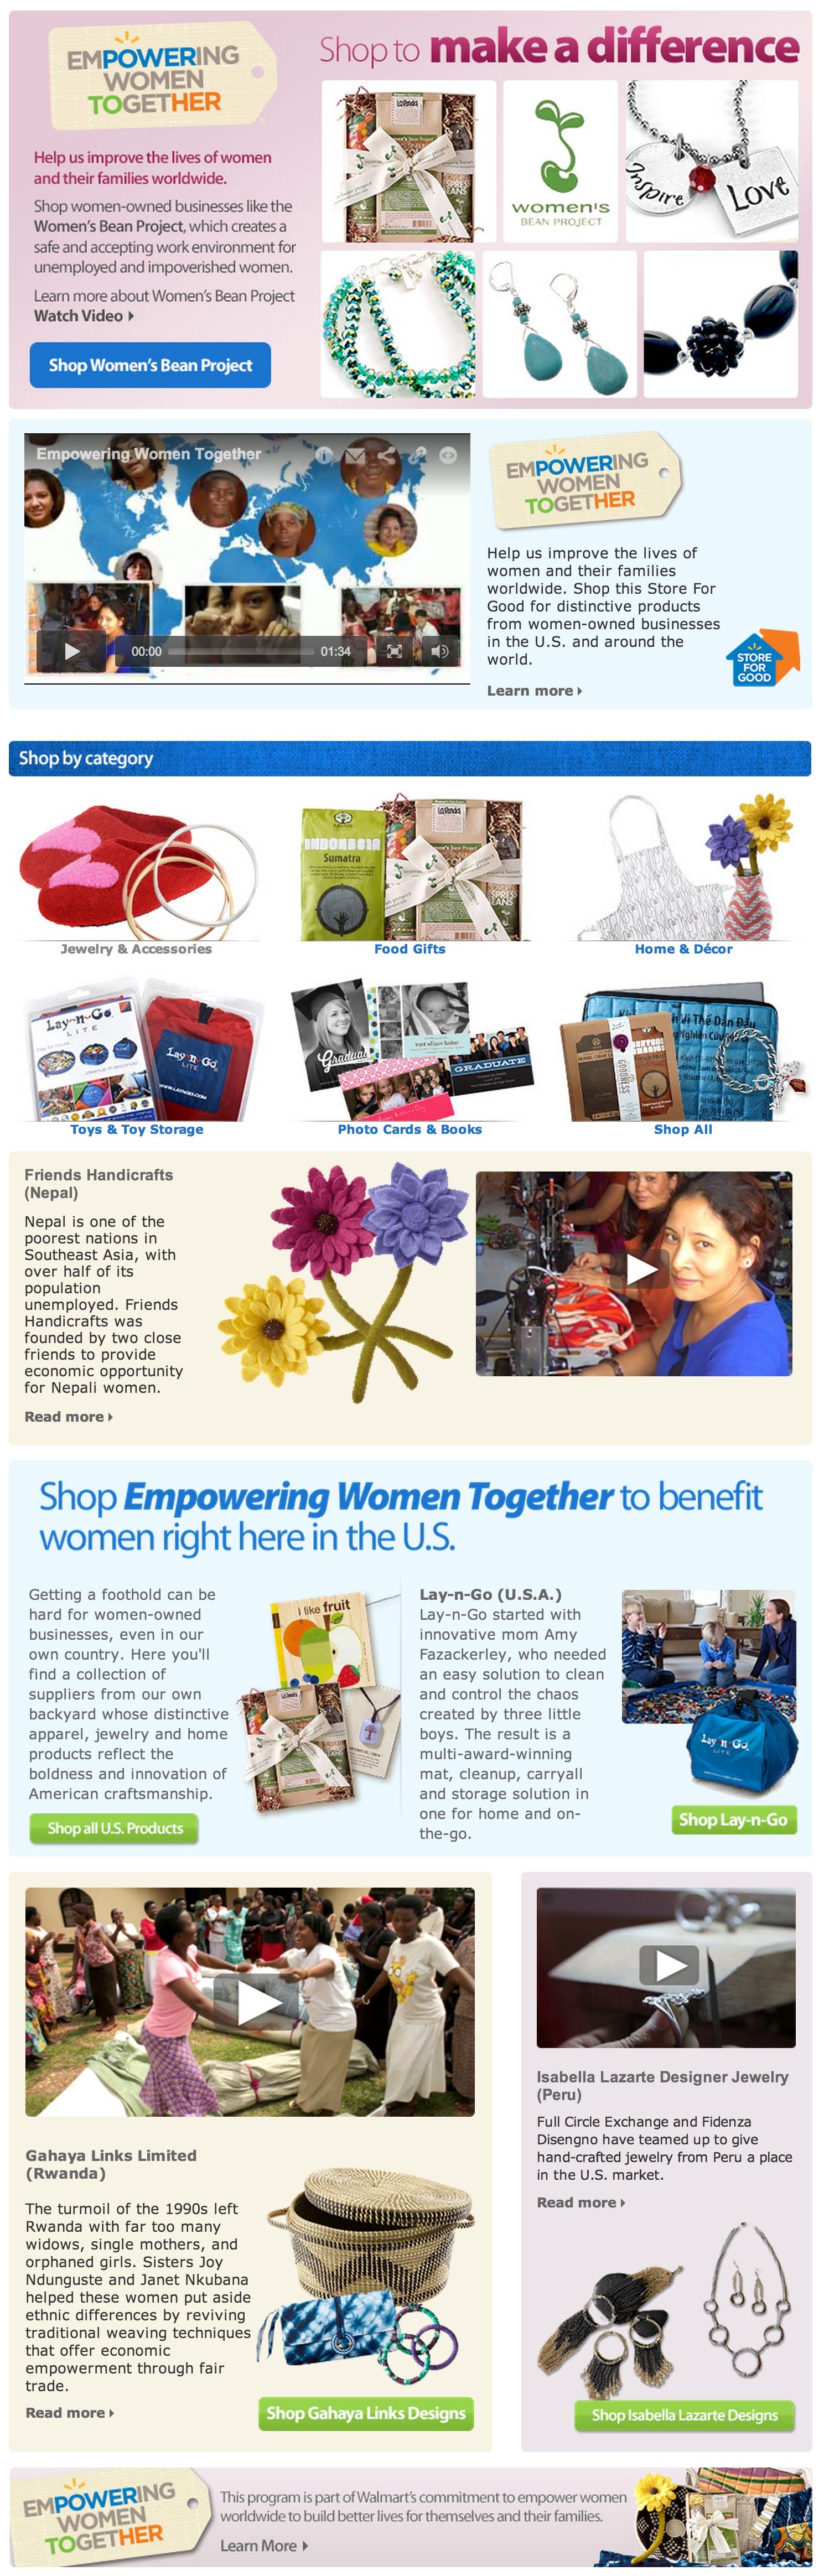 Empowering Women Together